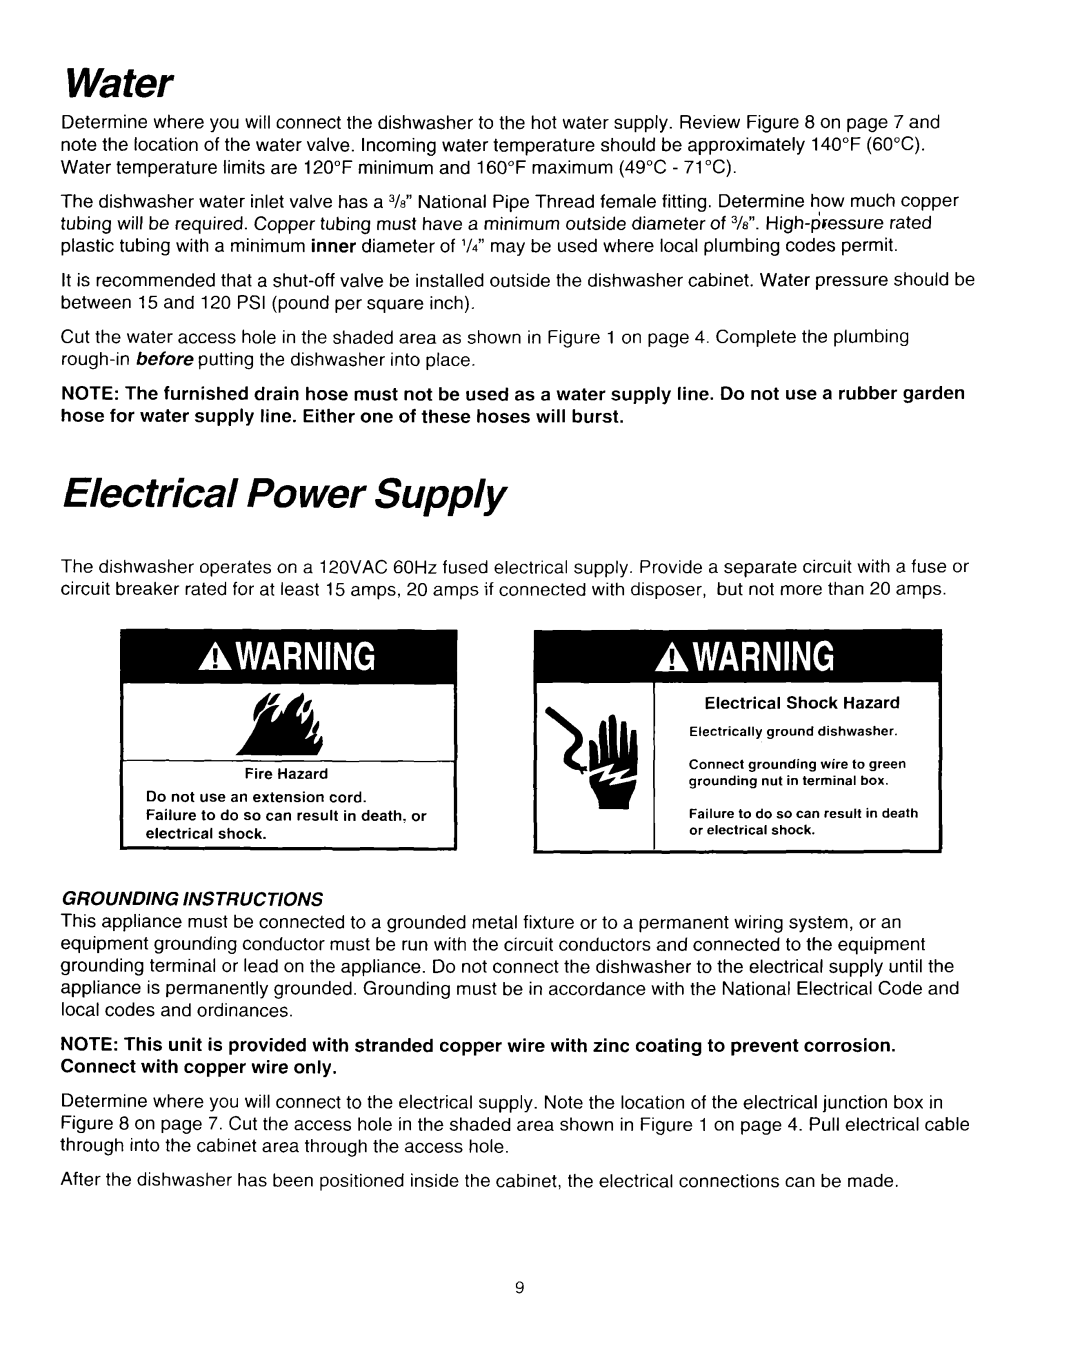 Whirlpool RUD0800EB installation instructions Water, Electrical Power Supply 